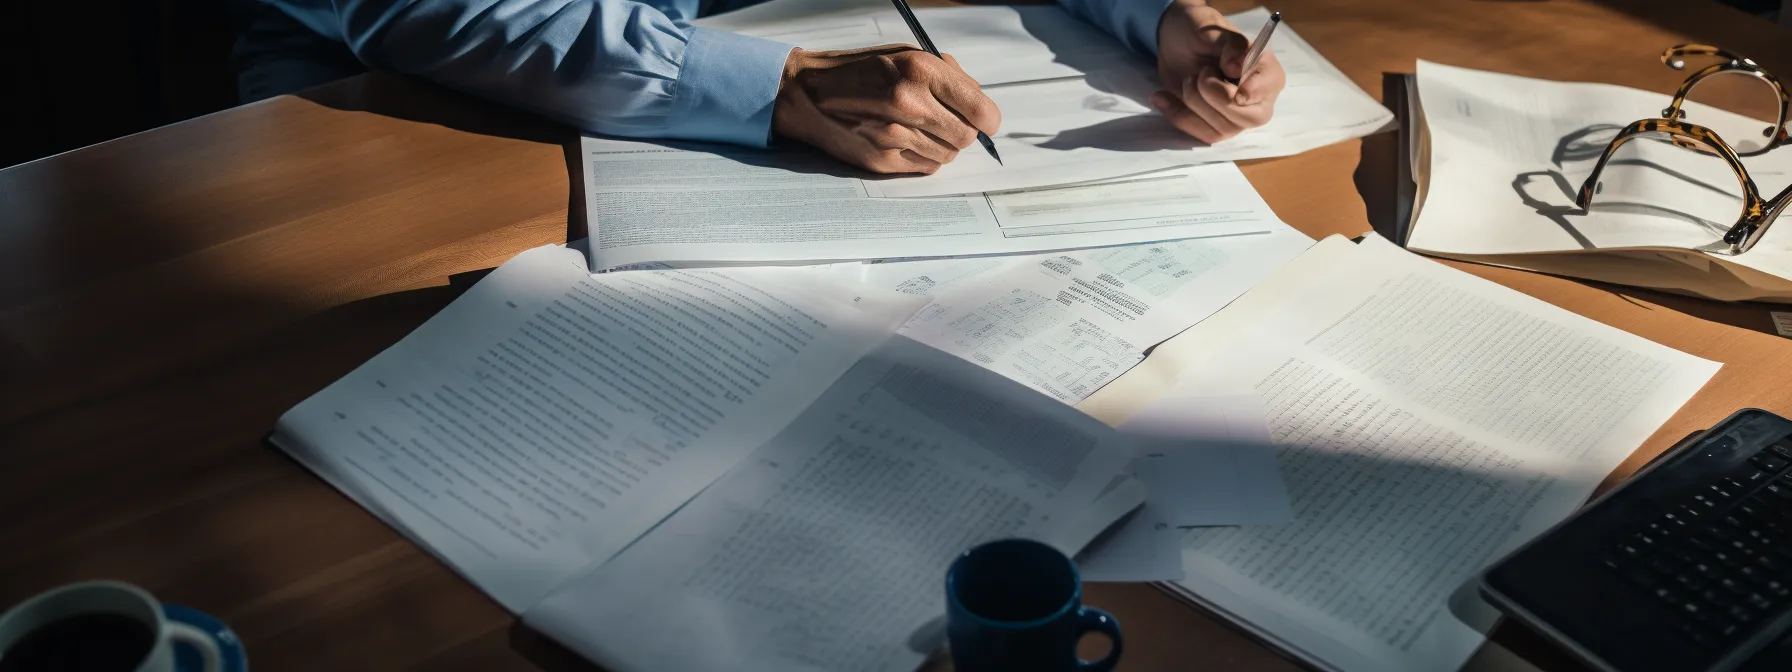 a person studying and comparing business contracts and agreements, with documents spread out on a table.